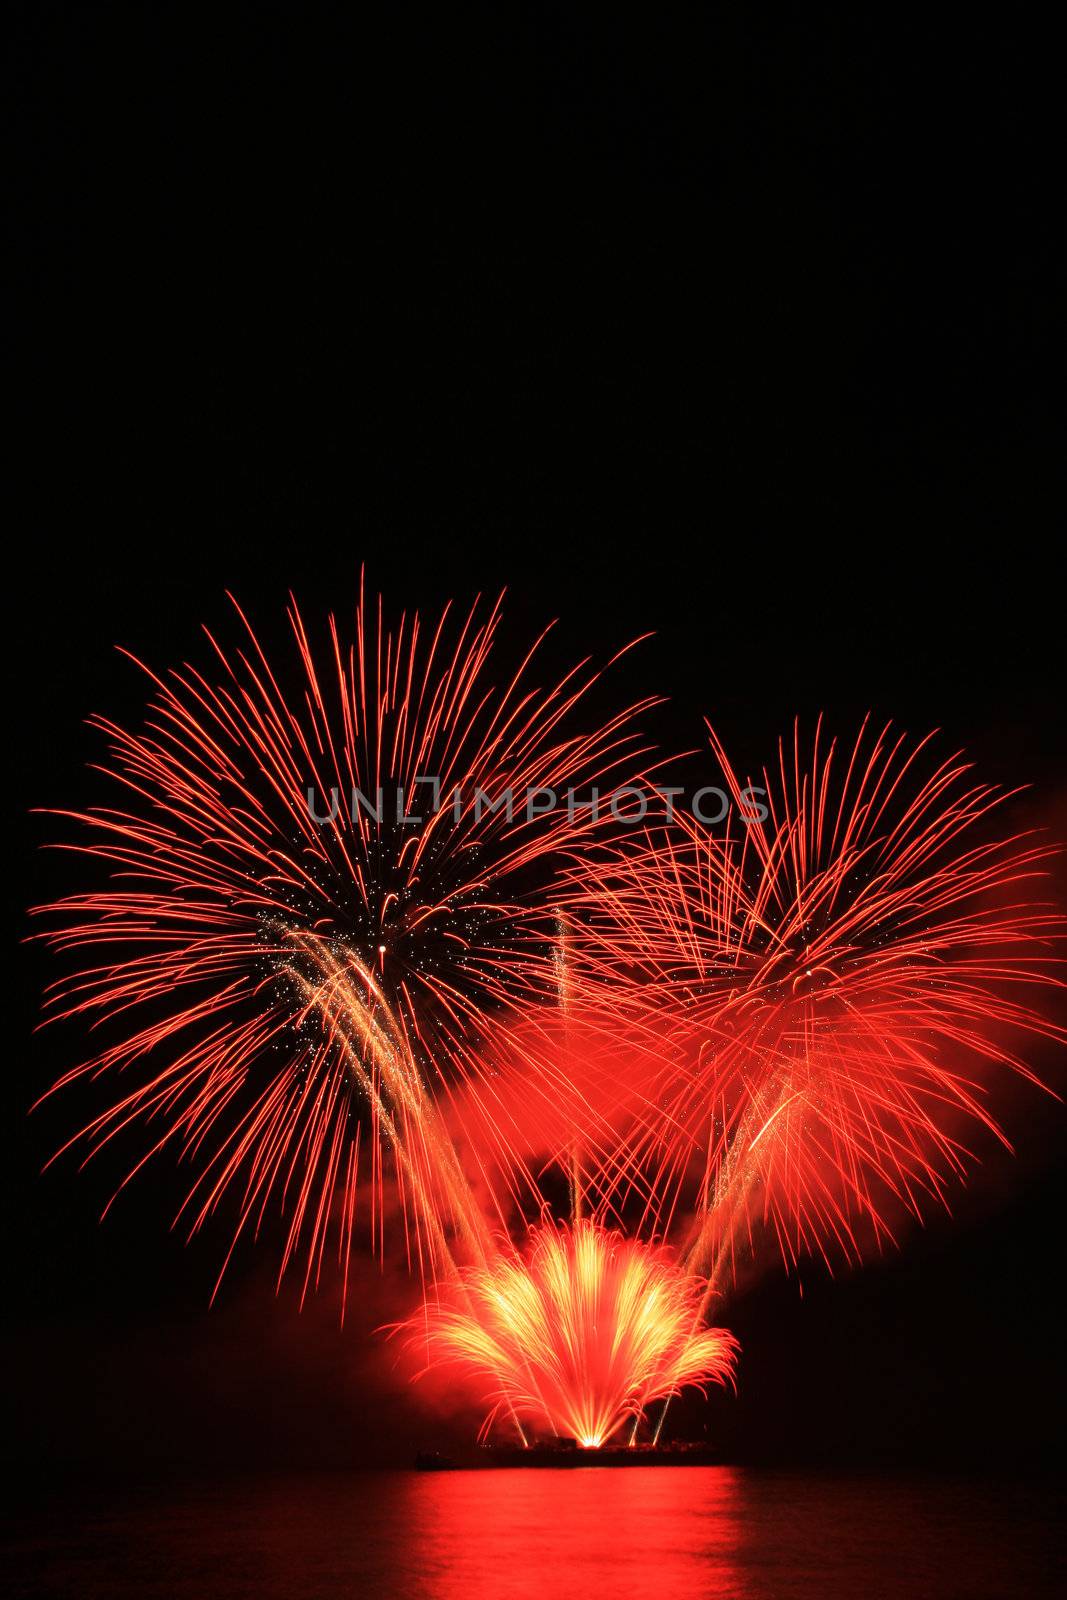 bright red fireworks against the dark sky
